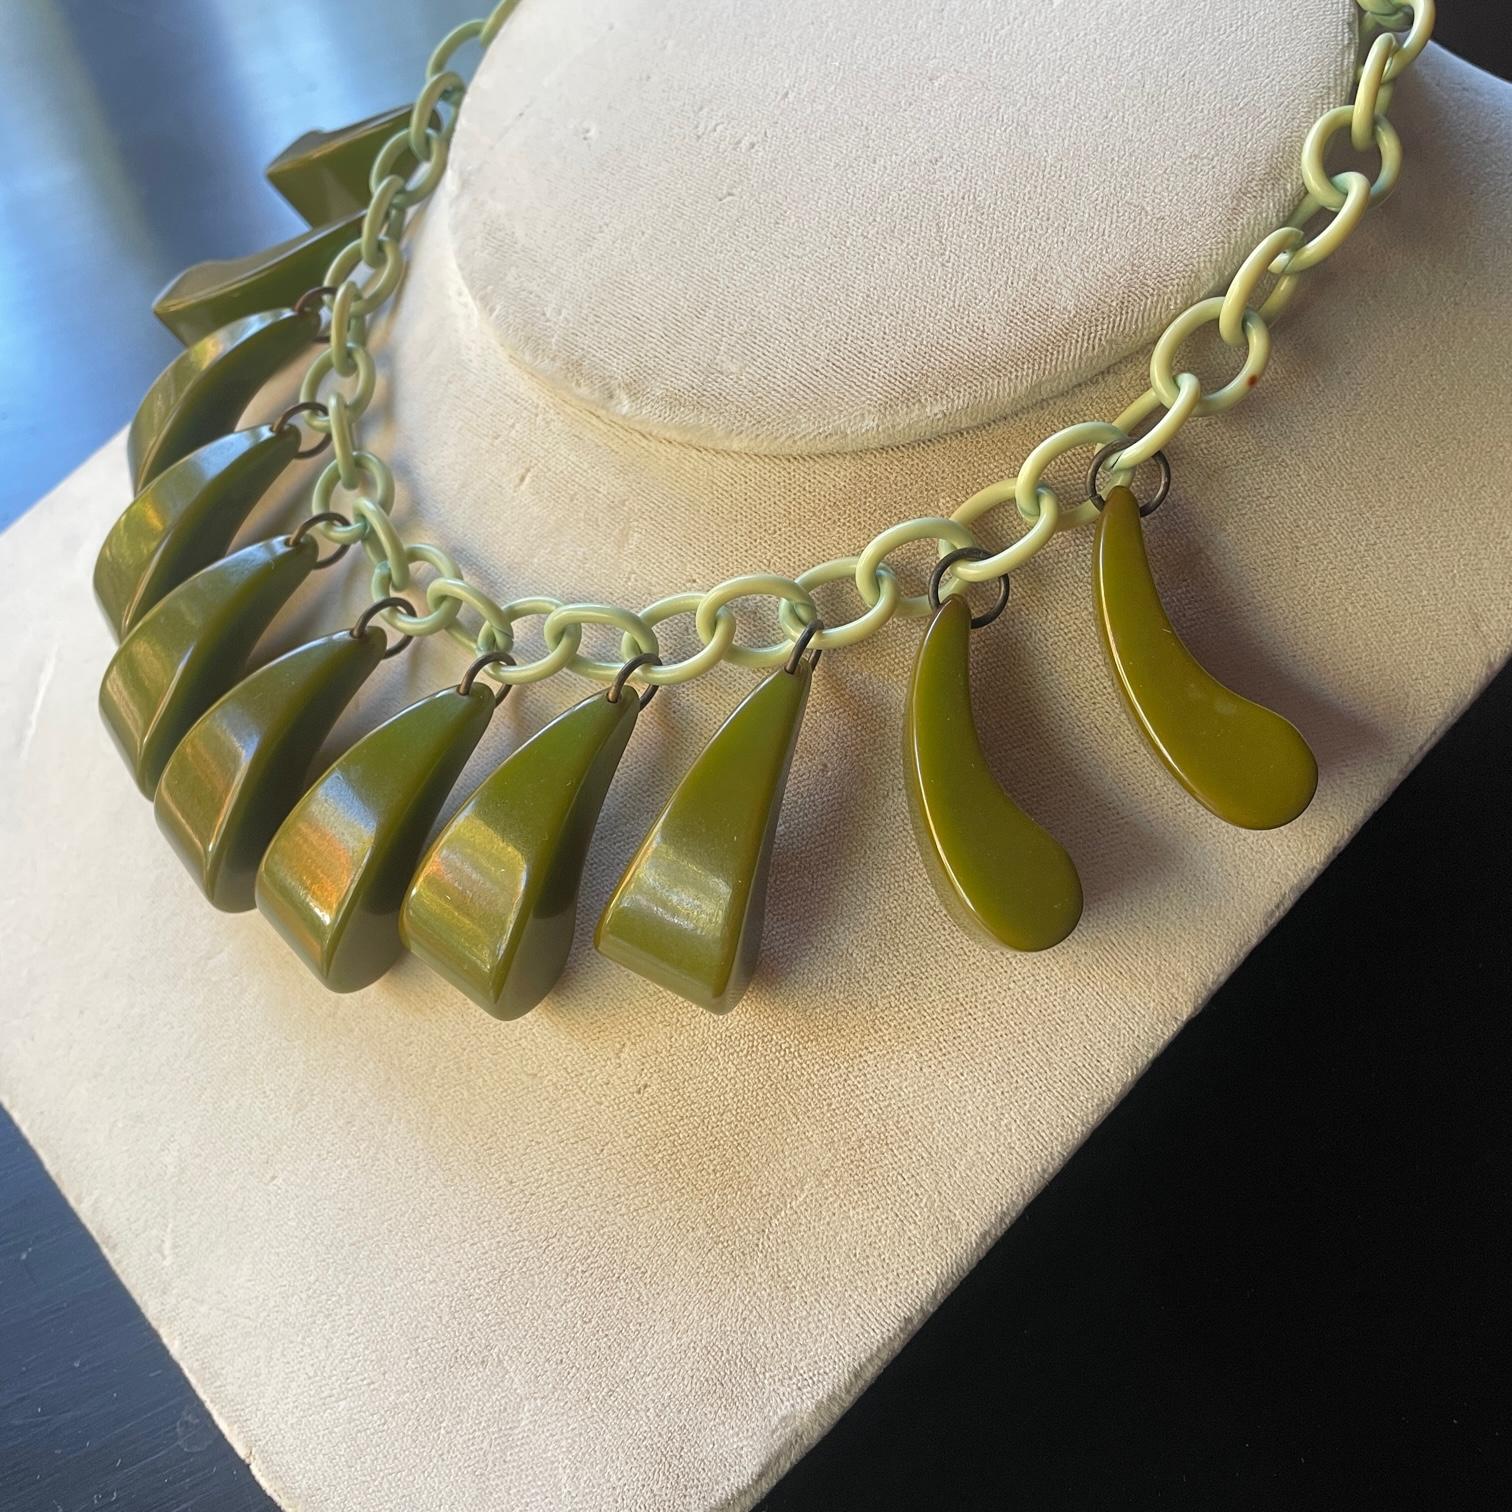 1930s Art Deco Bakelite + Celluloid Linked Necklace Dark Green Arching Dangles In Good Condition For Sale In Hyattsville, MD